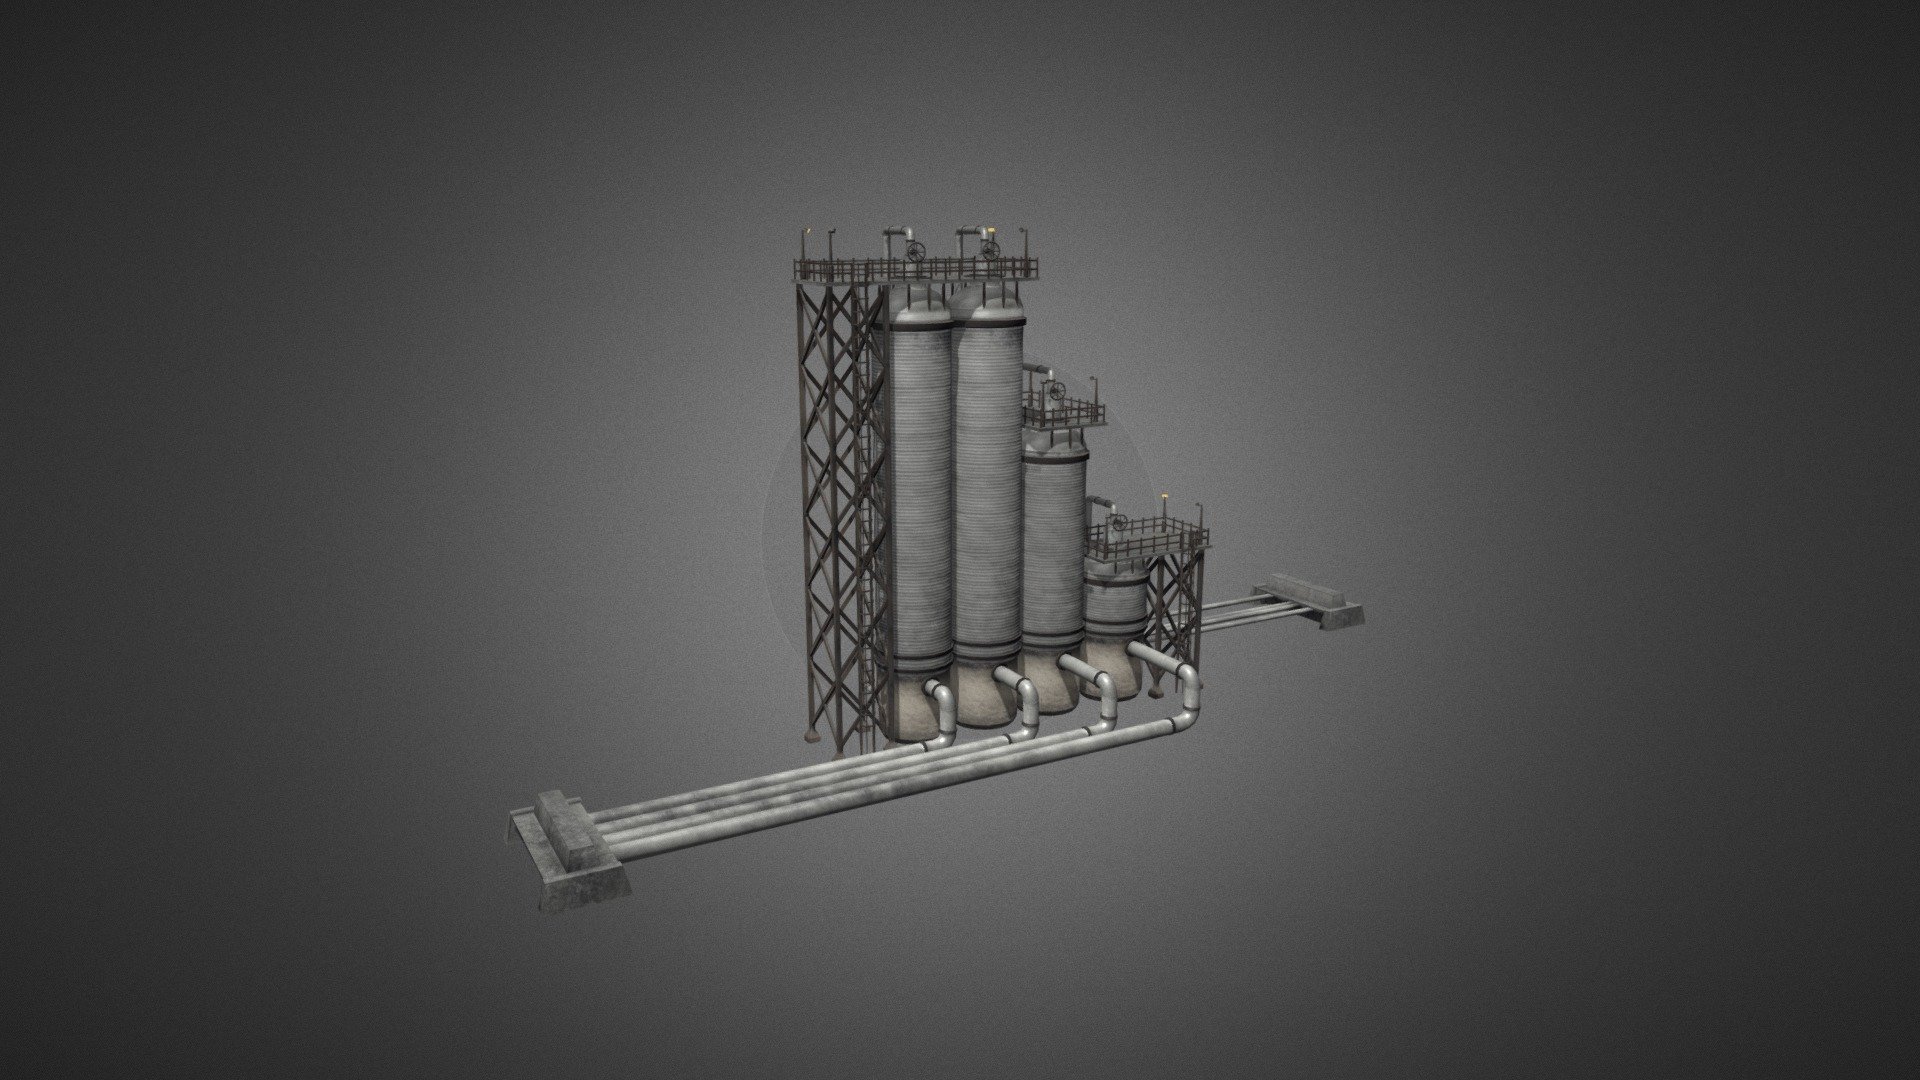 Low poly game-ready 3d model of an Oil Refinery 03 for Virtual Reality (VR), Augmented Reality (AR), games and other real-time apps 3d model